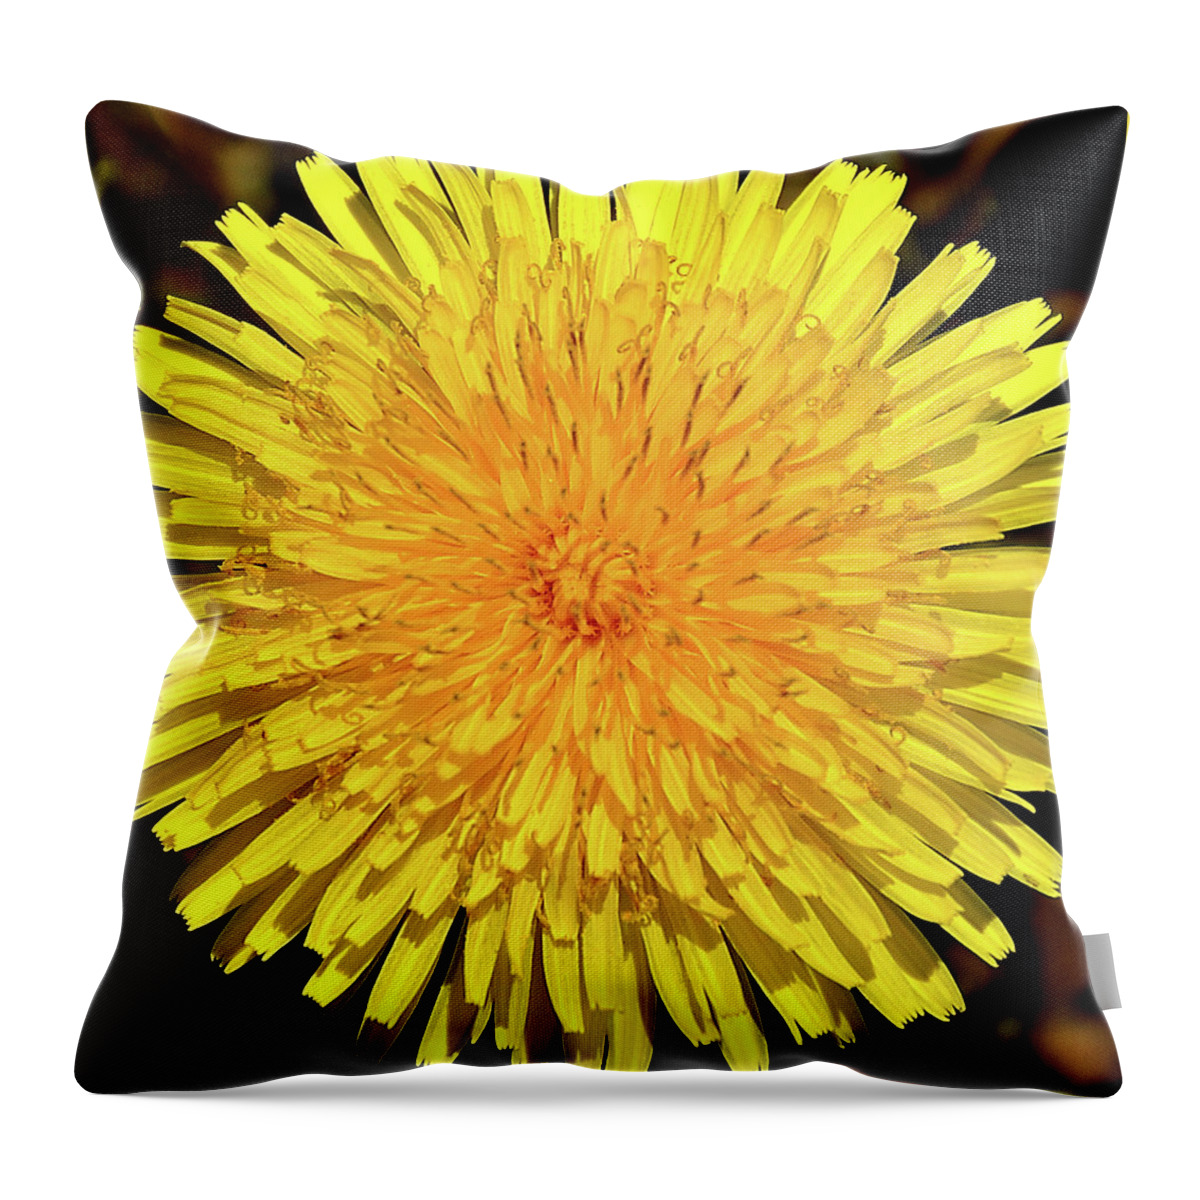 Dandelion Throw Pillow featuring the photograph Just A Weed by Mark Fuller